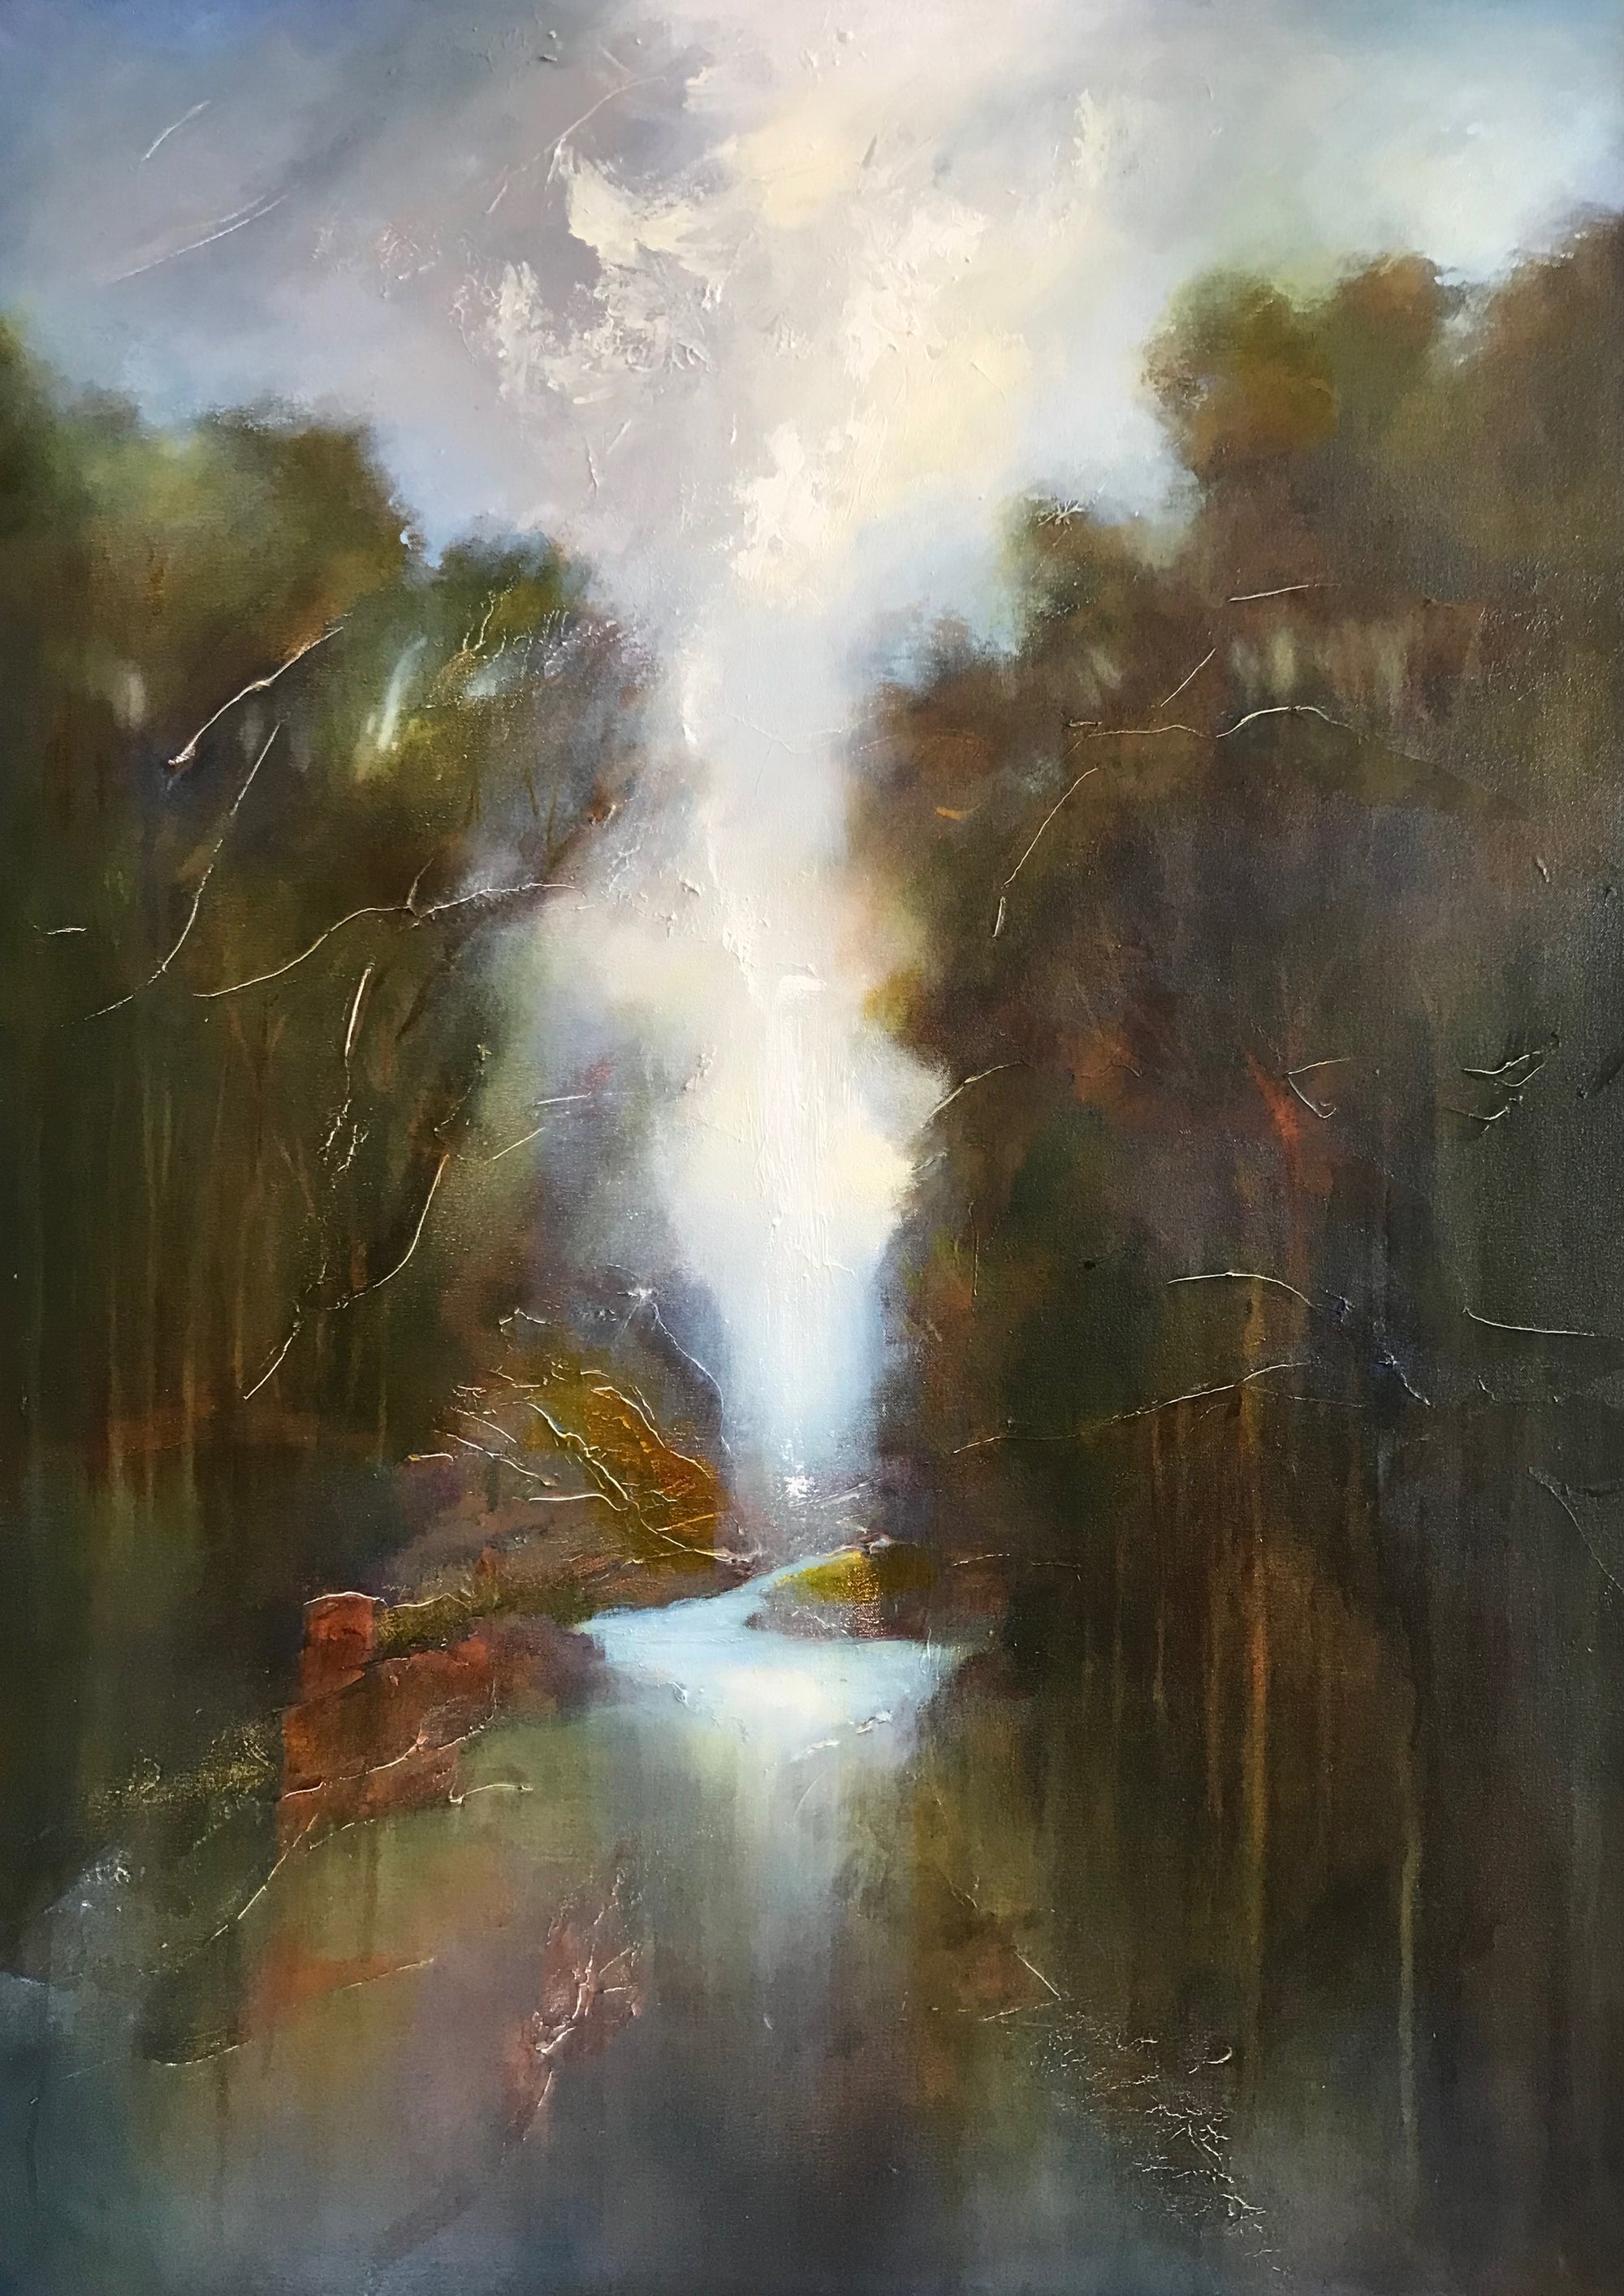 The Way of The Water | New works by Darlene Lobos